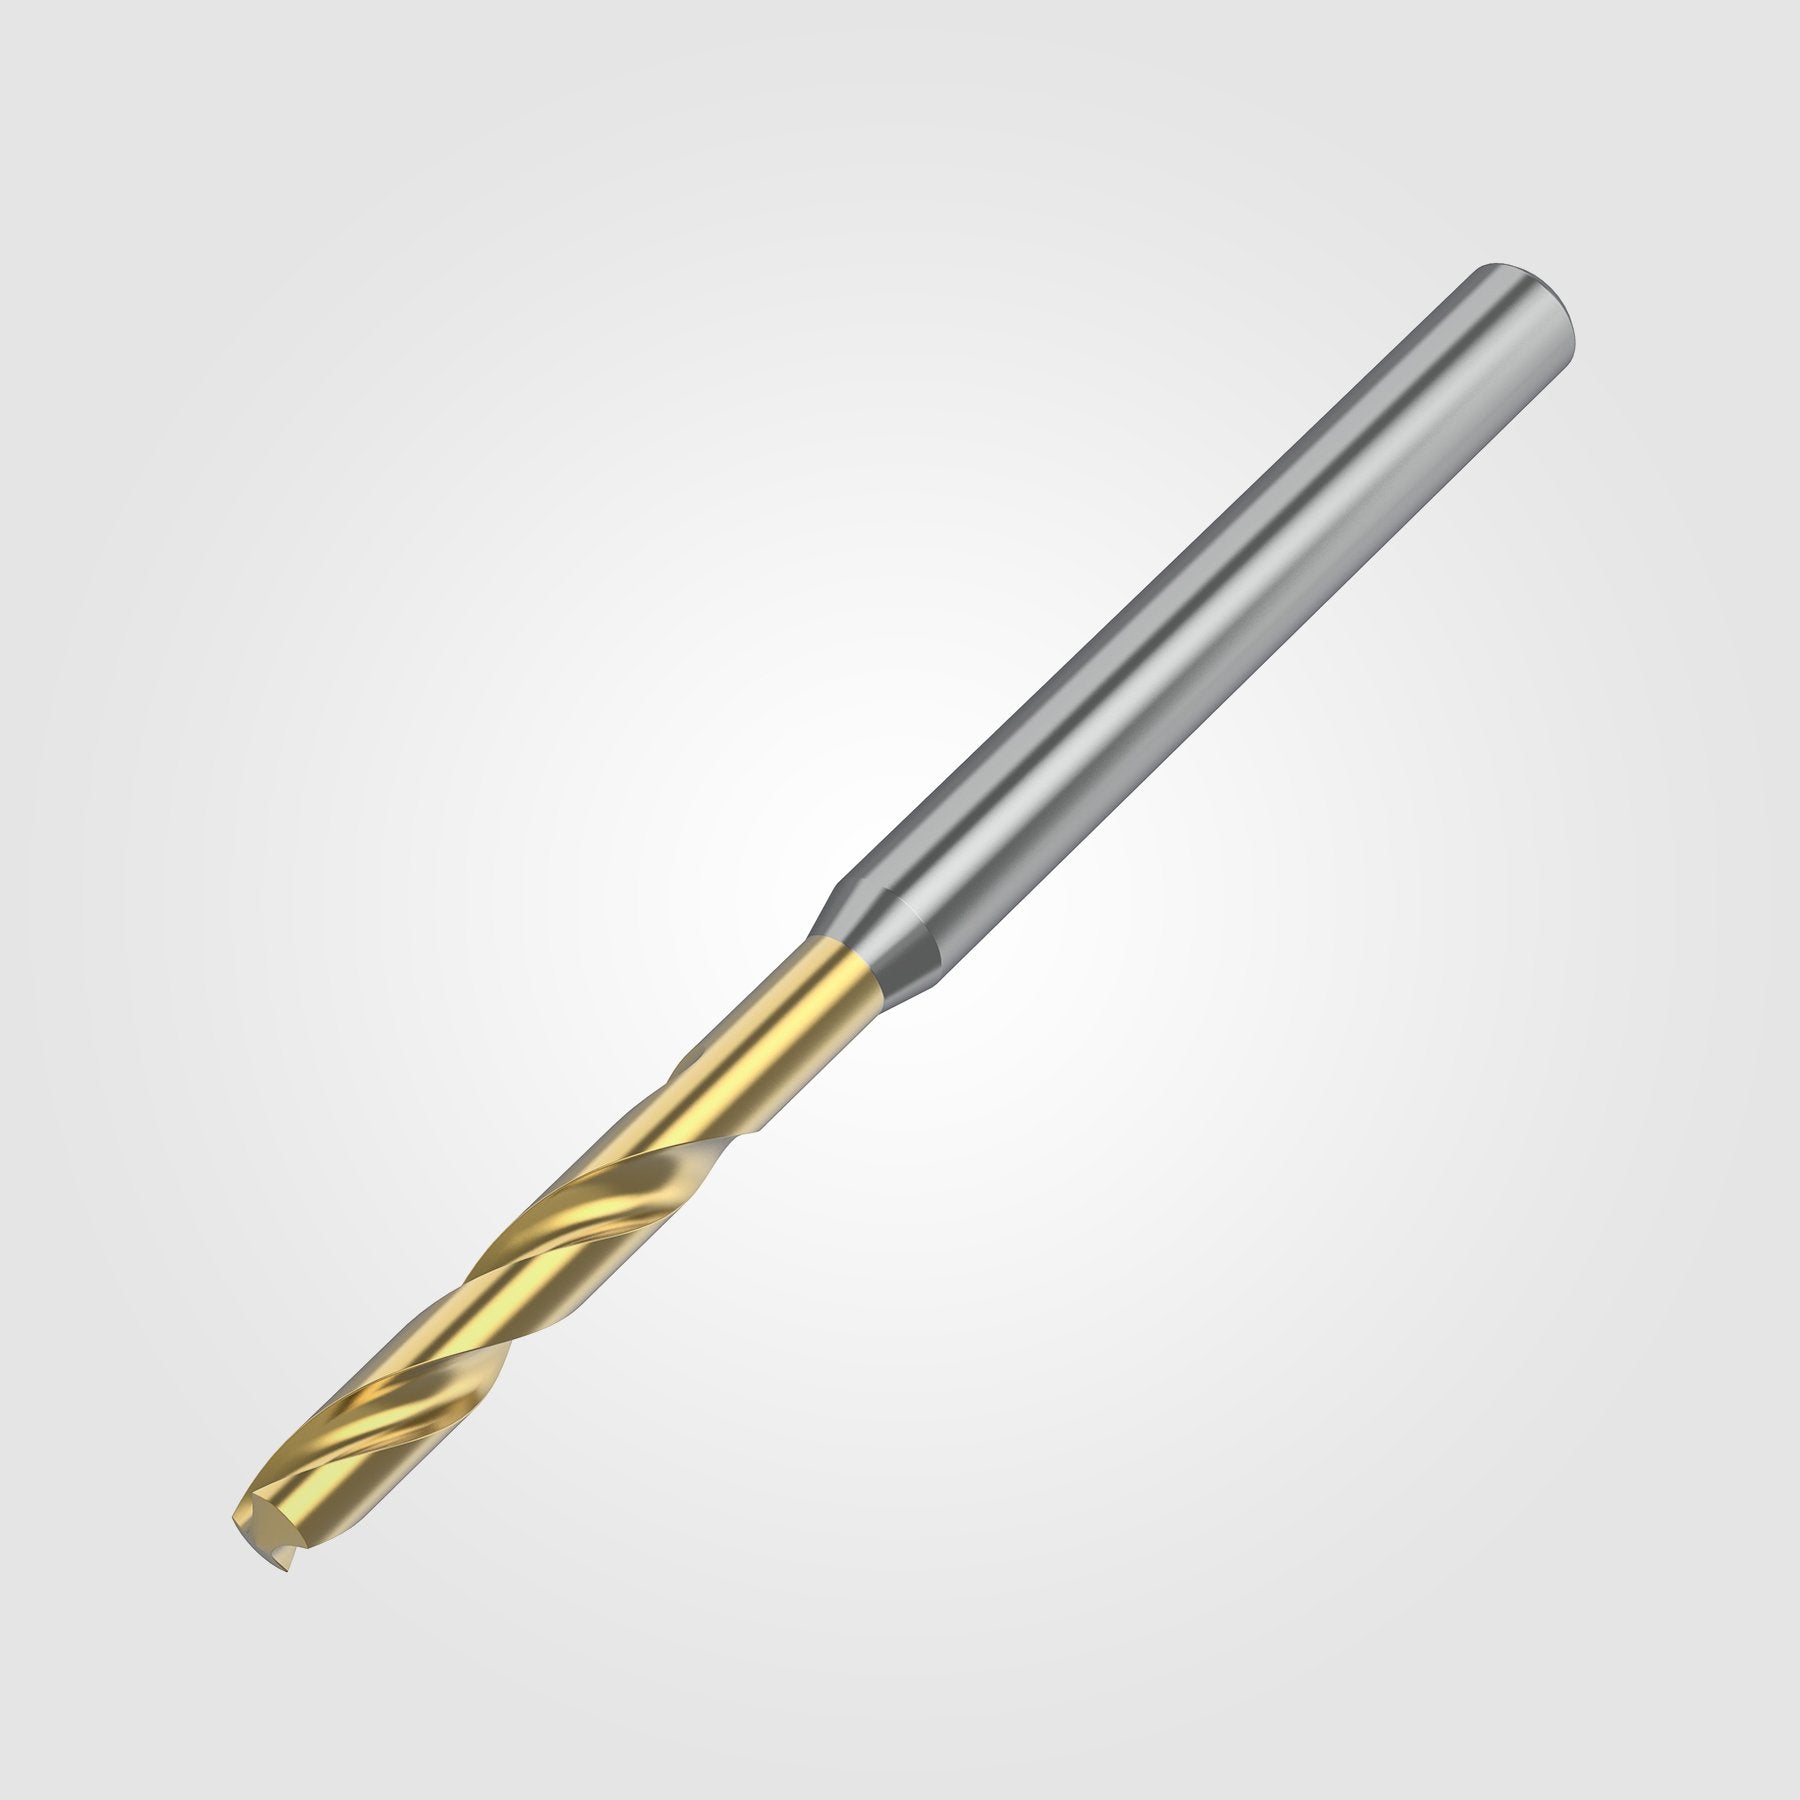 GOdrill (THROUGH COOLANT) | 8.2mm / .3228" / 3xD | SOLID CARBIDE DRILL | 4151177